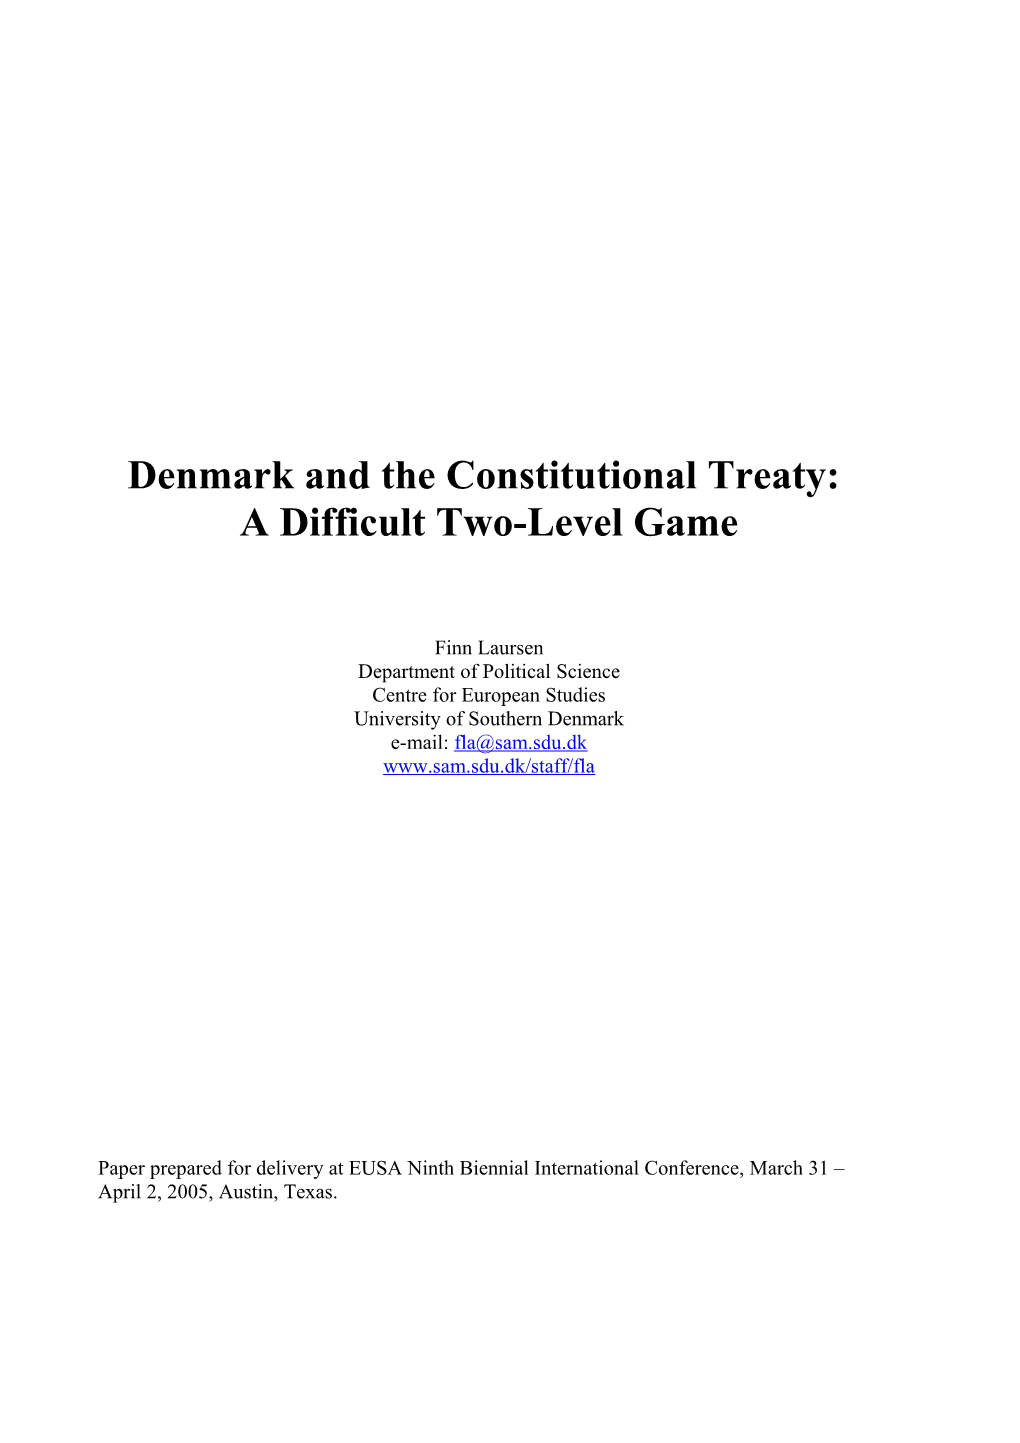 Denmark, the European Convention and IGC 2003-04: the Handling of a Difficult Two-Level Game